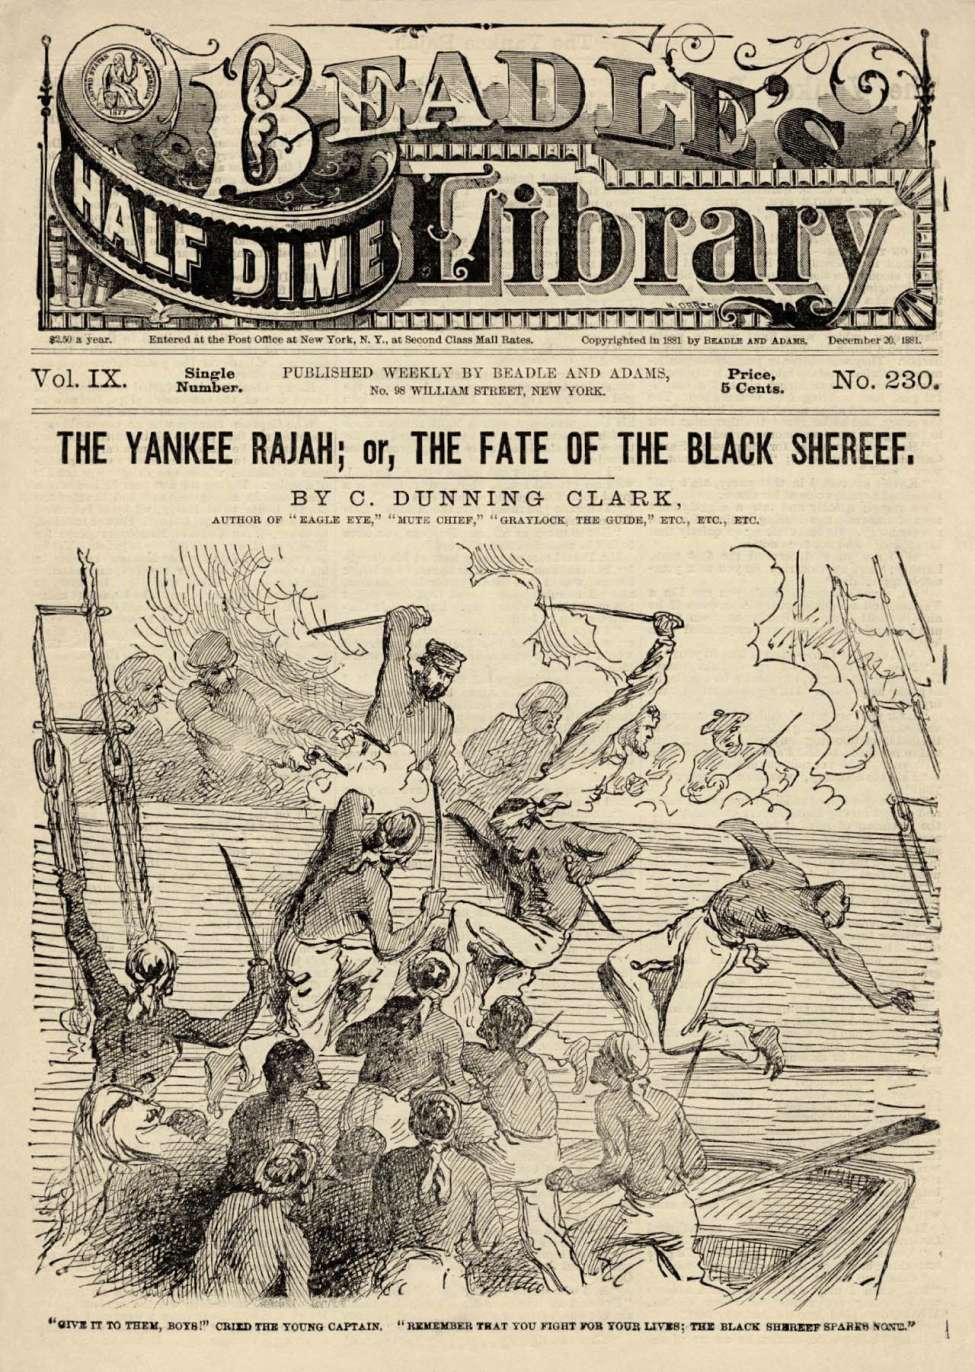 Comic Book Cover For Beadle's Half Dime Library 230 - The Yankee Rajah